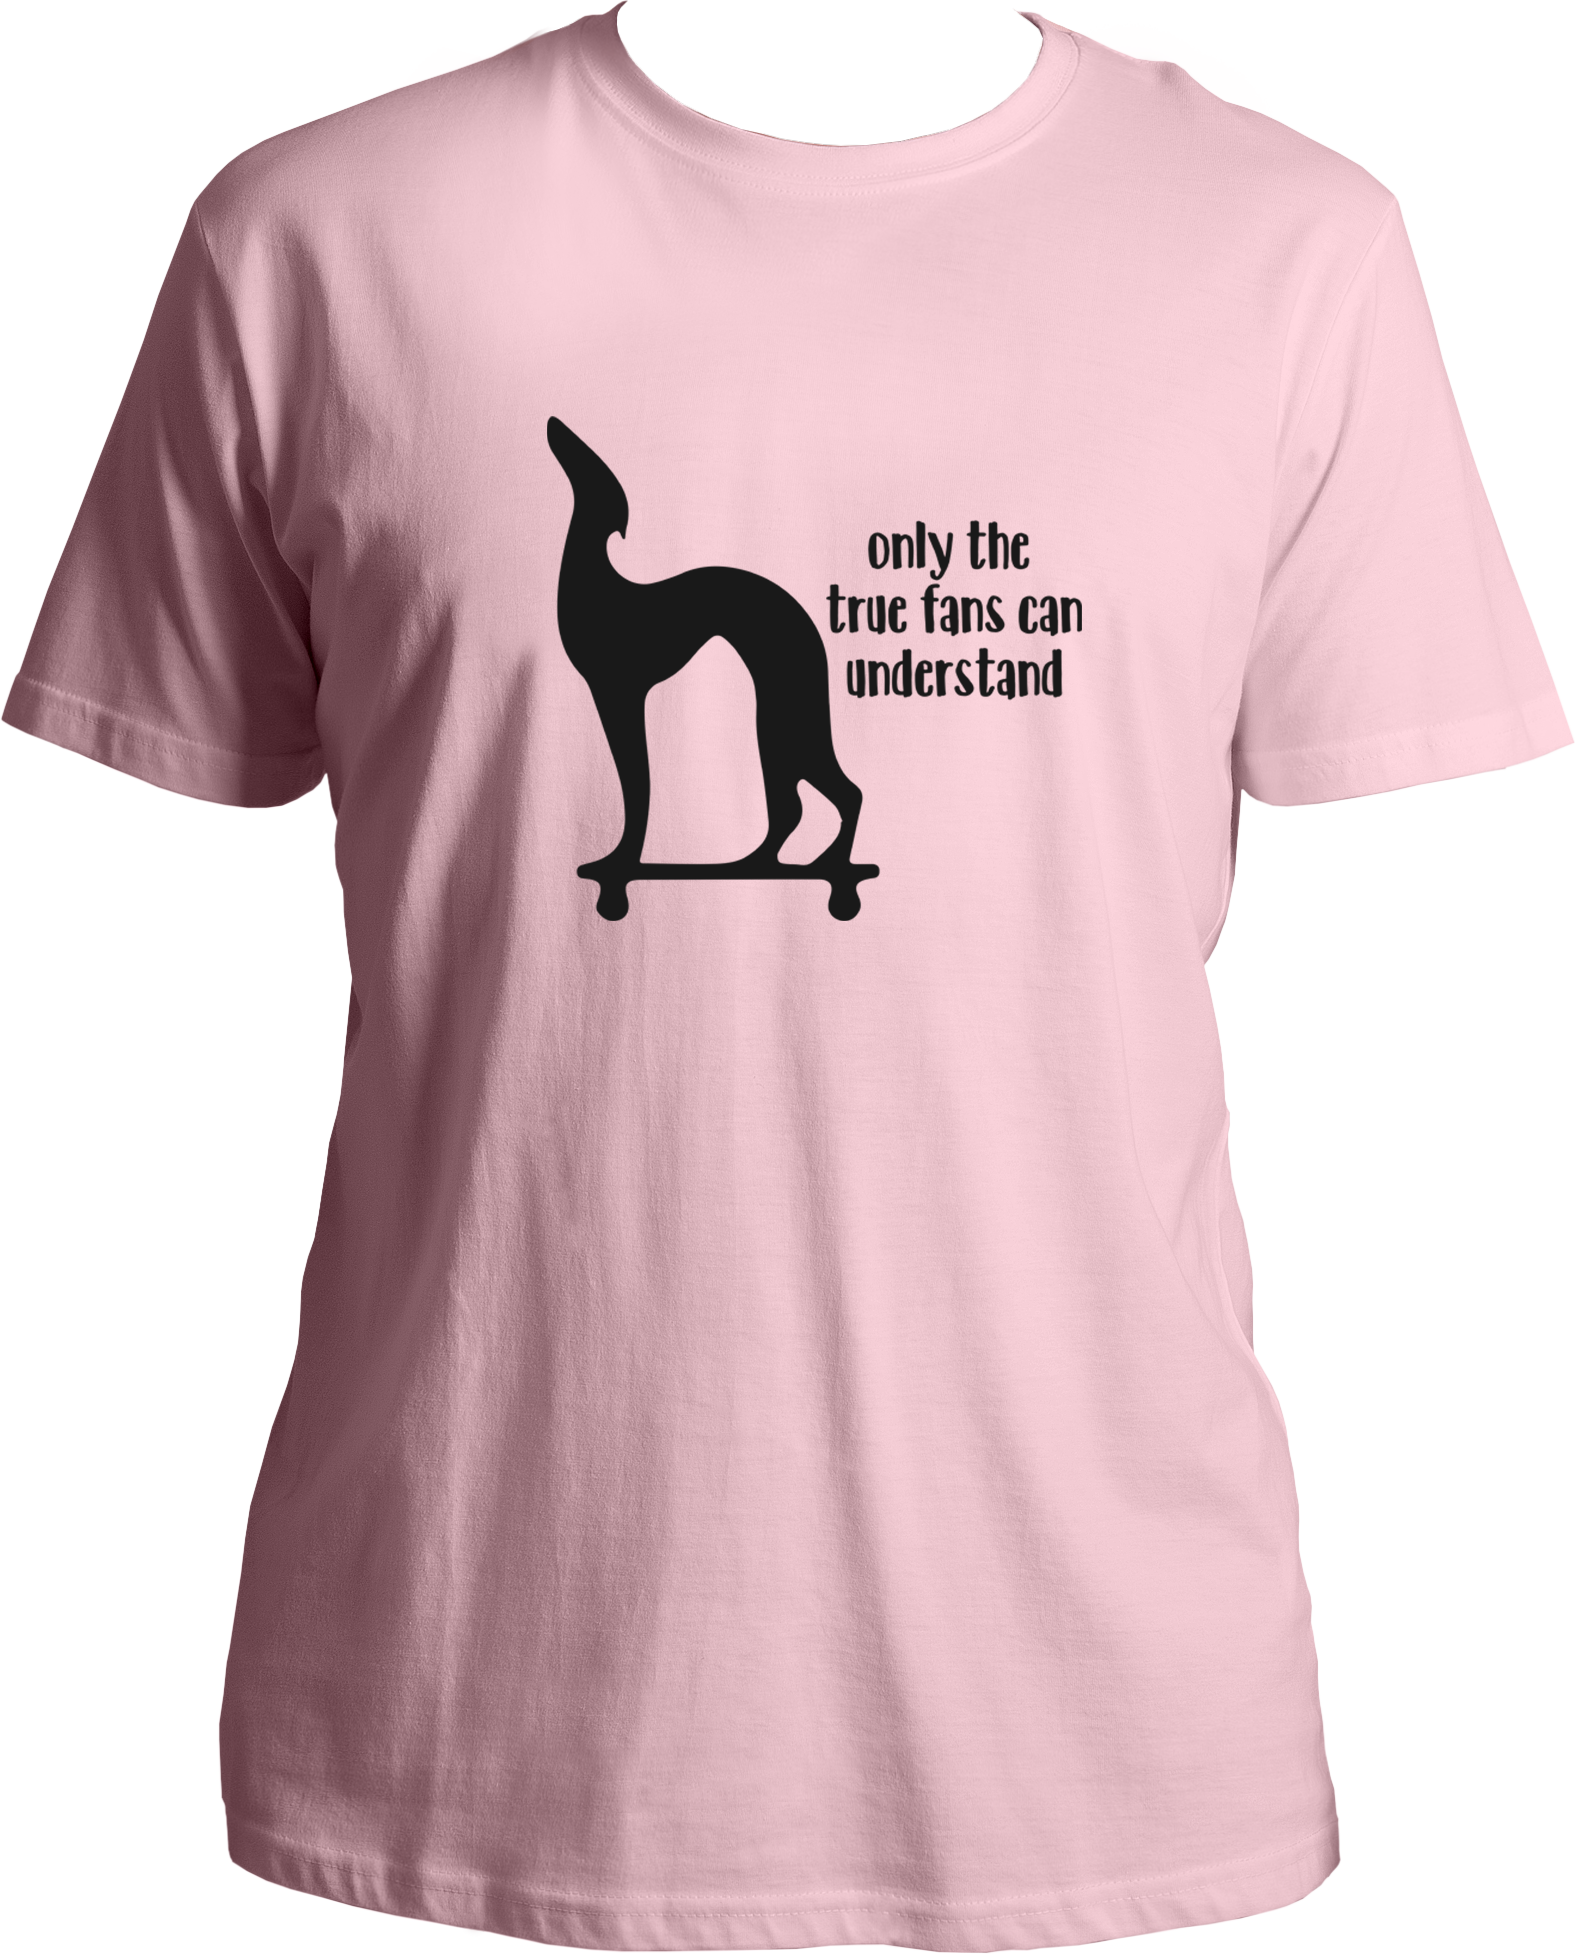 "Unleash your inner F.R.I.E.N.D with our Pat The Dog T-Shirts! Pay homage to the iconic Friends episode where Joey gifts Chandler a unique canine statue. Made with soft cotton, this shirt is a must-have for any devoted fan. Don't miss out on the laughs and get yours today! 🛋️👕 #TrueFanFashion"